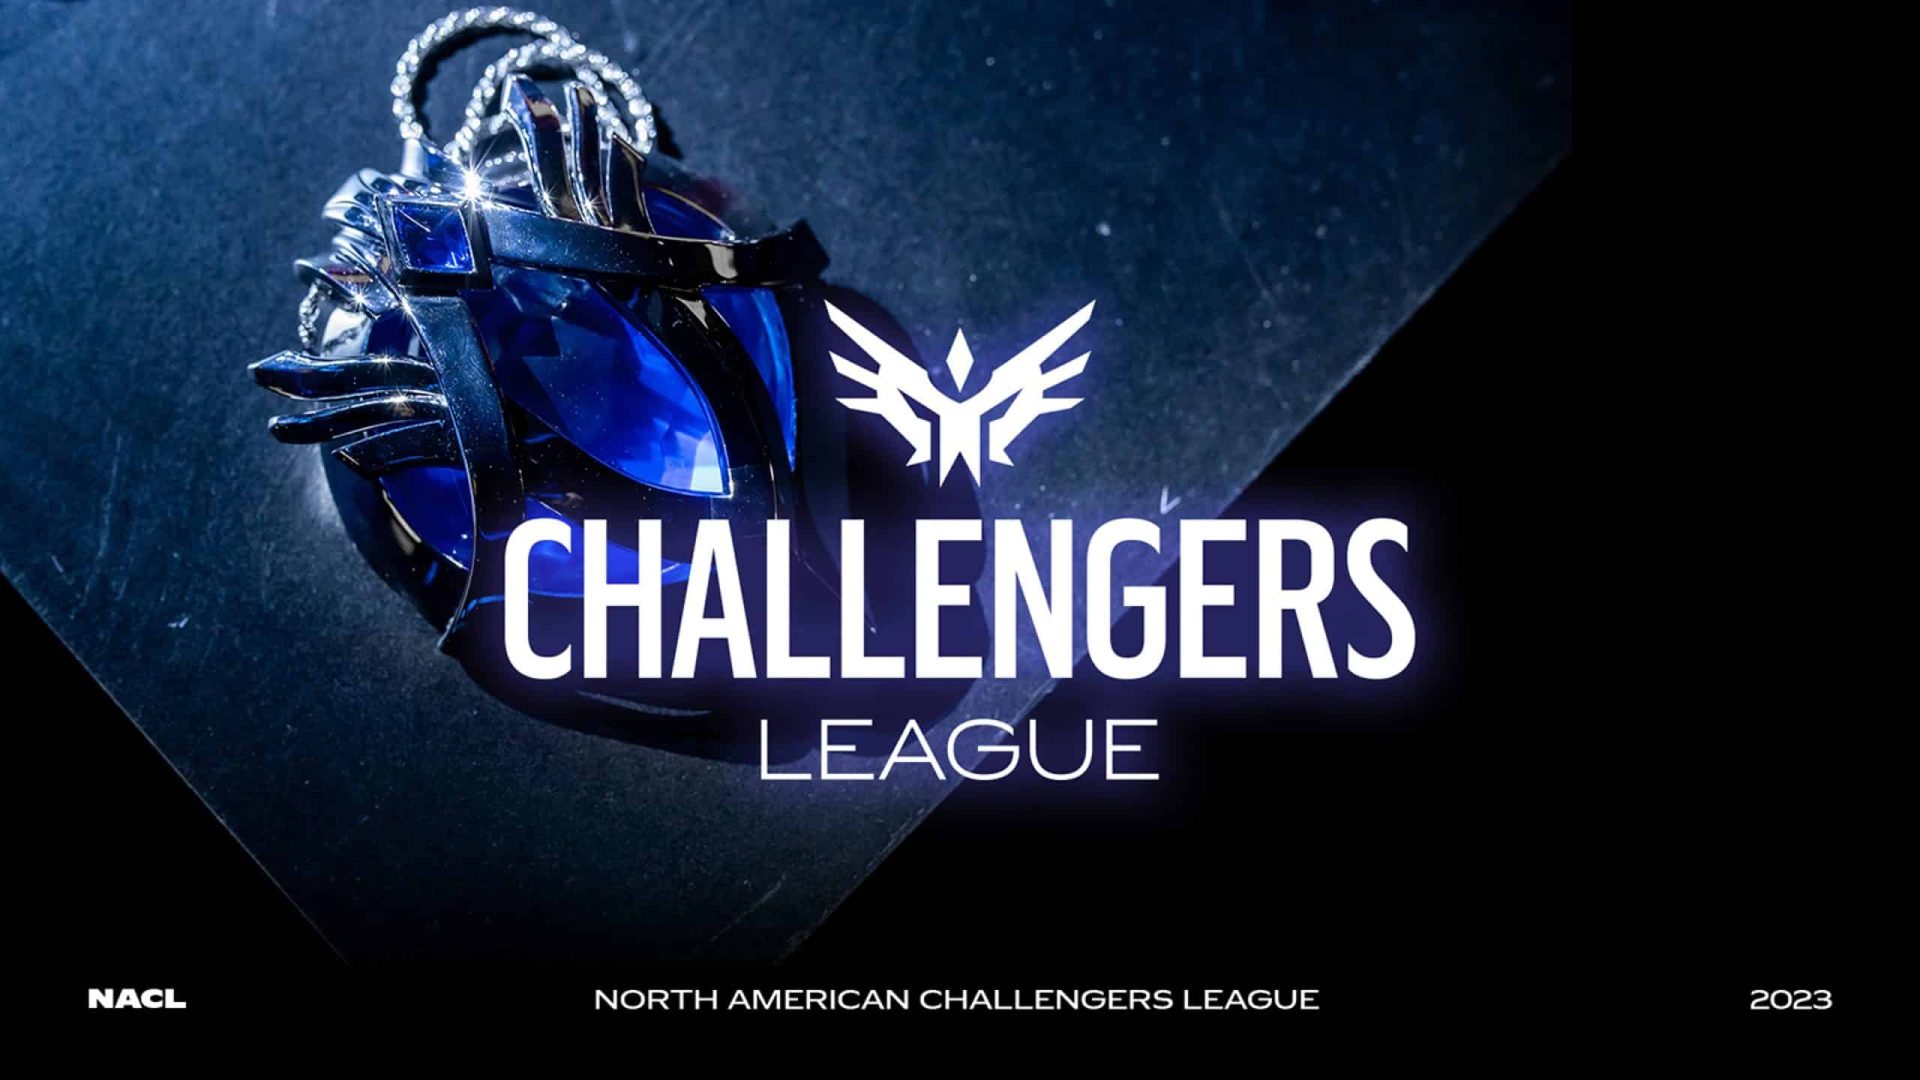 LCS Academy Ecosystem Is Getting Revamped With the North American Challengers League